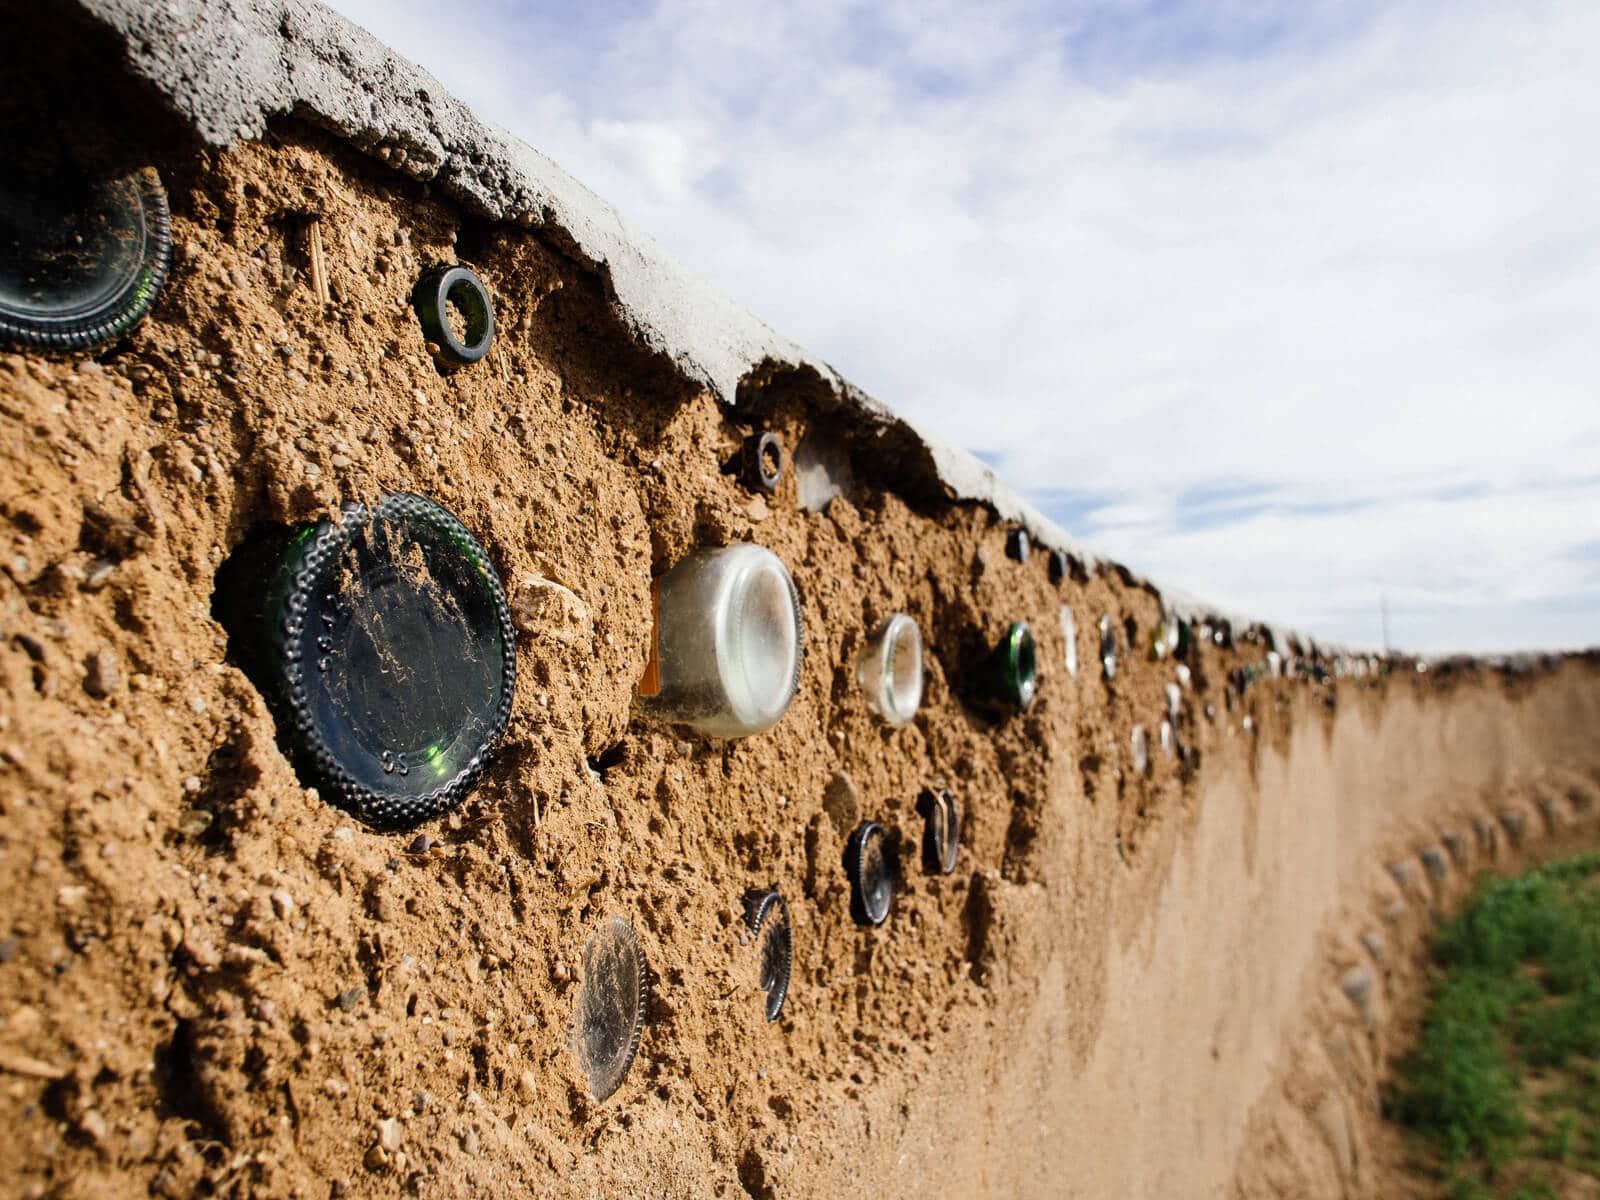 Adobe mud wall made from recycled glass bottles and aluminum cans